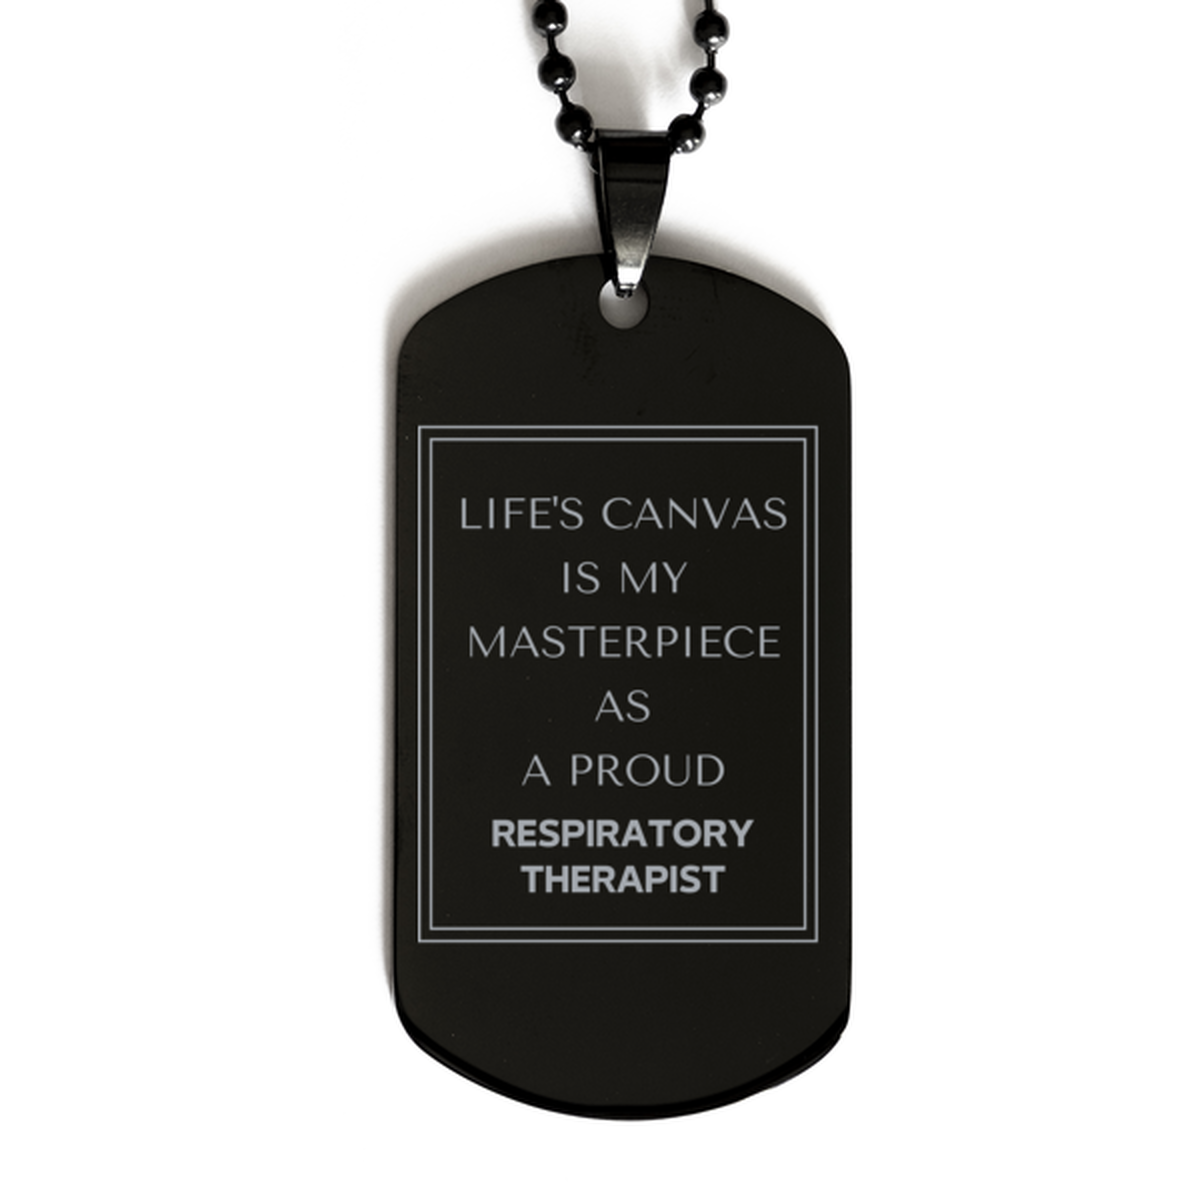 Proud Respiratory Therapist Gifts, Life's canvas is my masterpiece, Epic Birthday Christmas Unique Black Dog Tag For Respiratory Therapist, Coworkers, Men, Women, Friends